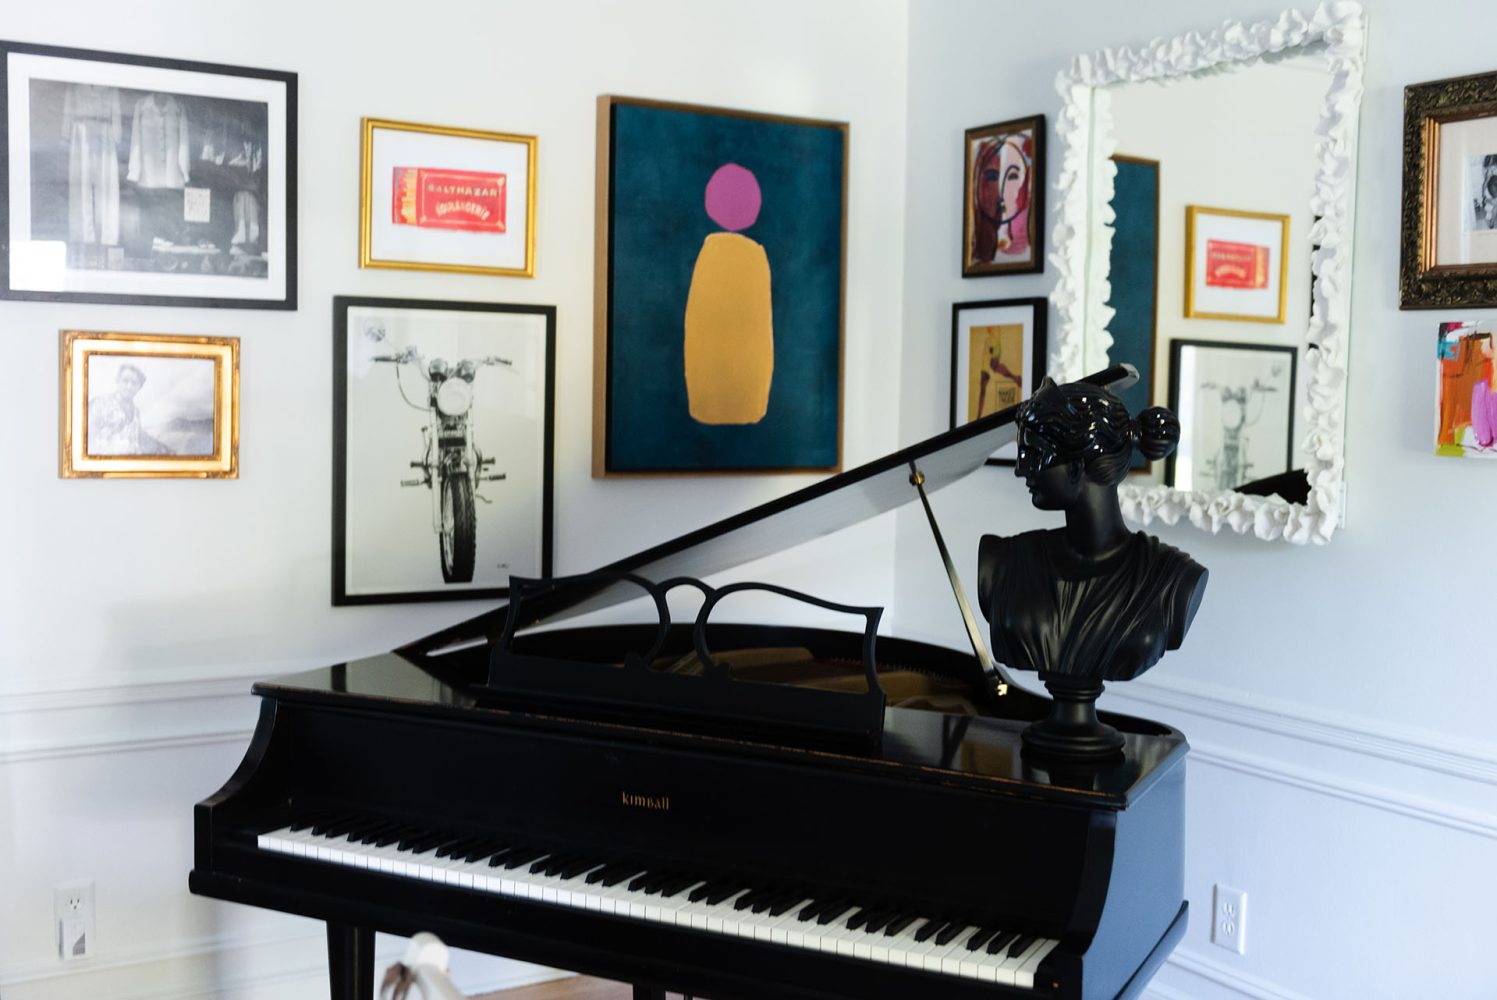 A gallery wall hung in a corner above a black baby grand piano. Art pieces include black and white photography, color paintings and prints, a mirror with a white frame, and a black bust on the piano.